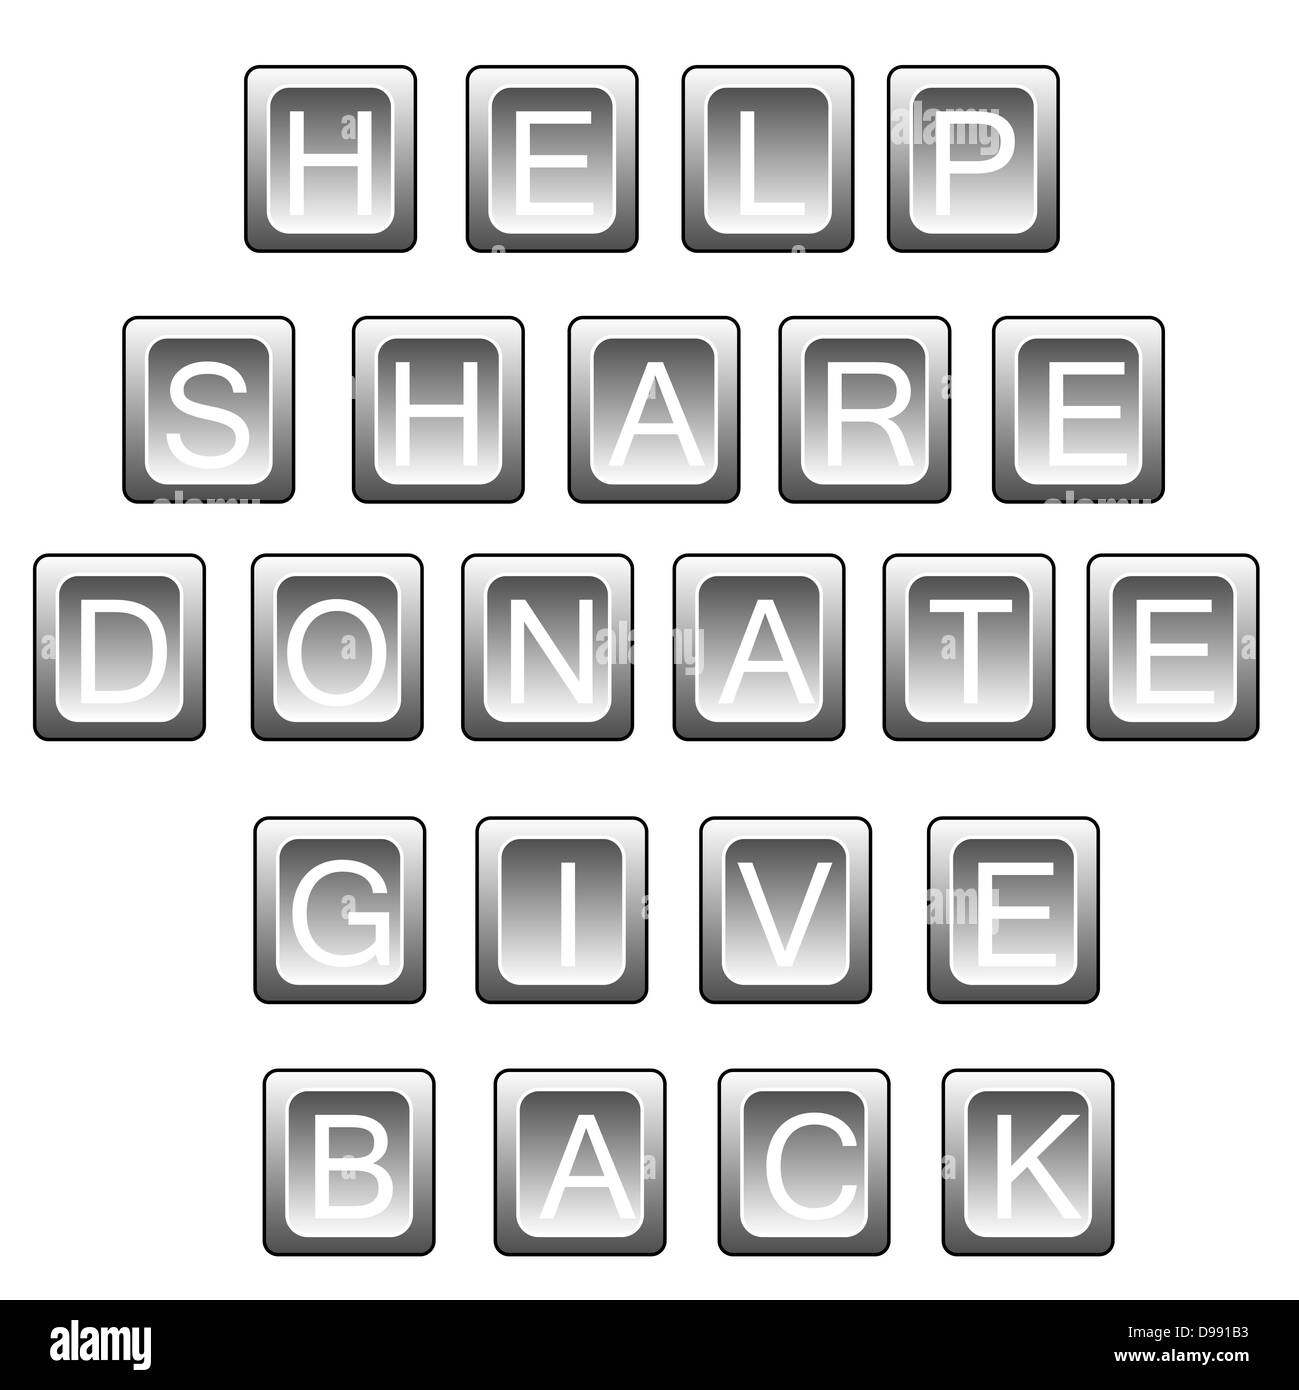 Words related to helping (help, share, donate, give back) in keyboard letters, isolated on white. Stock Photo